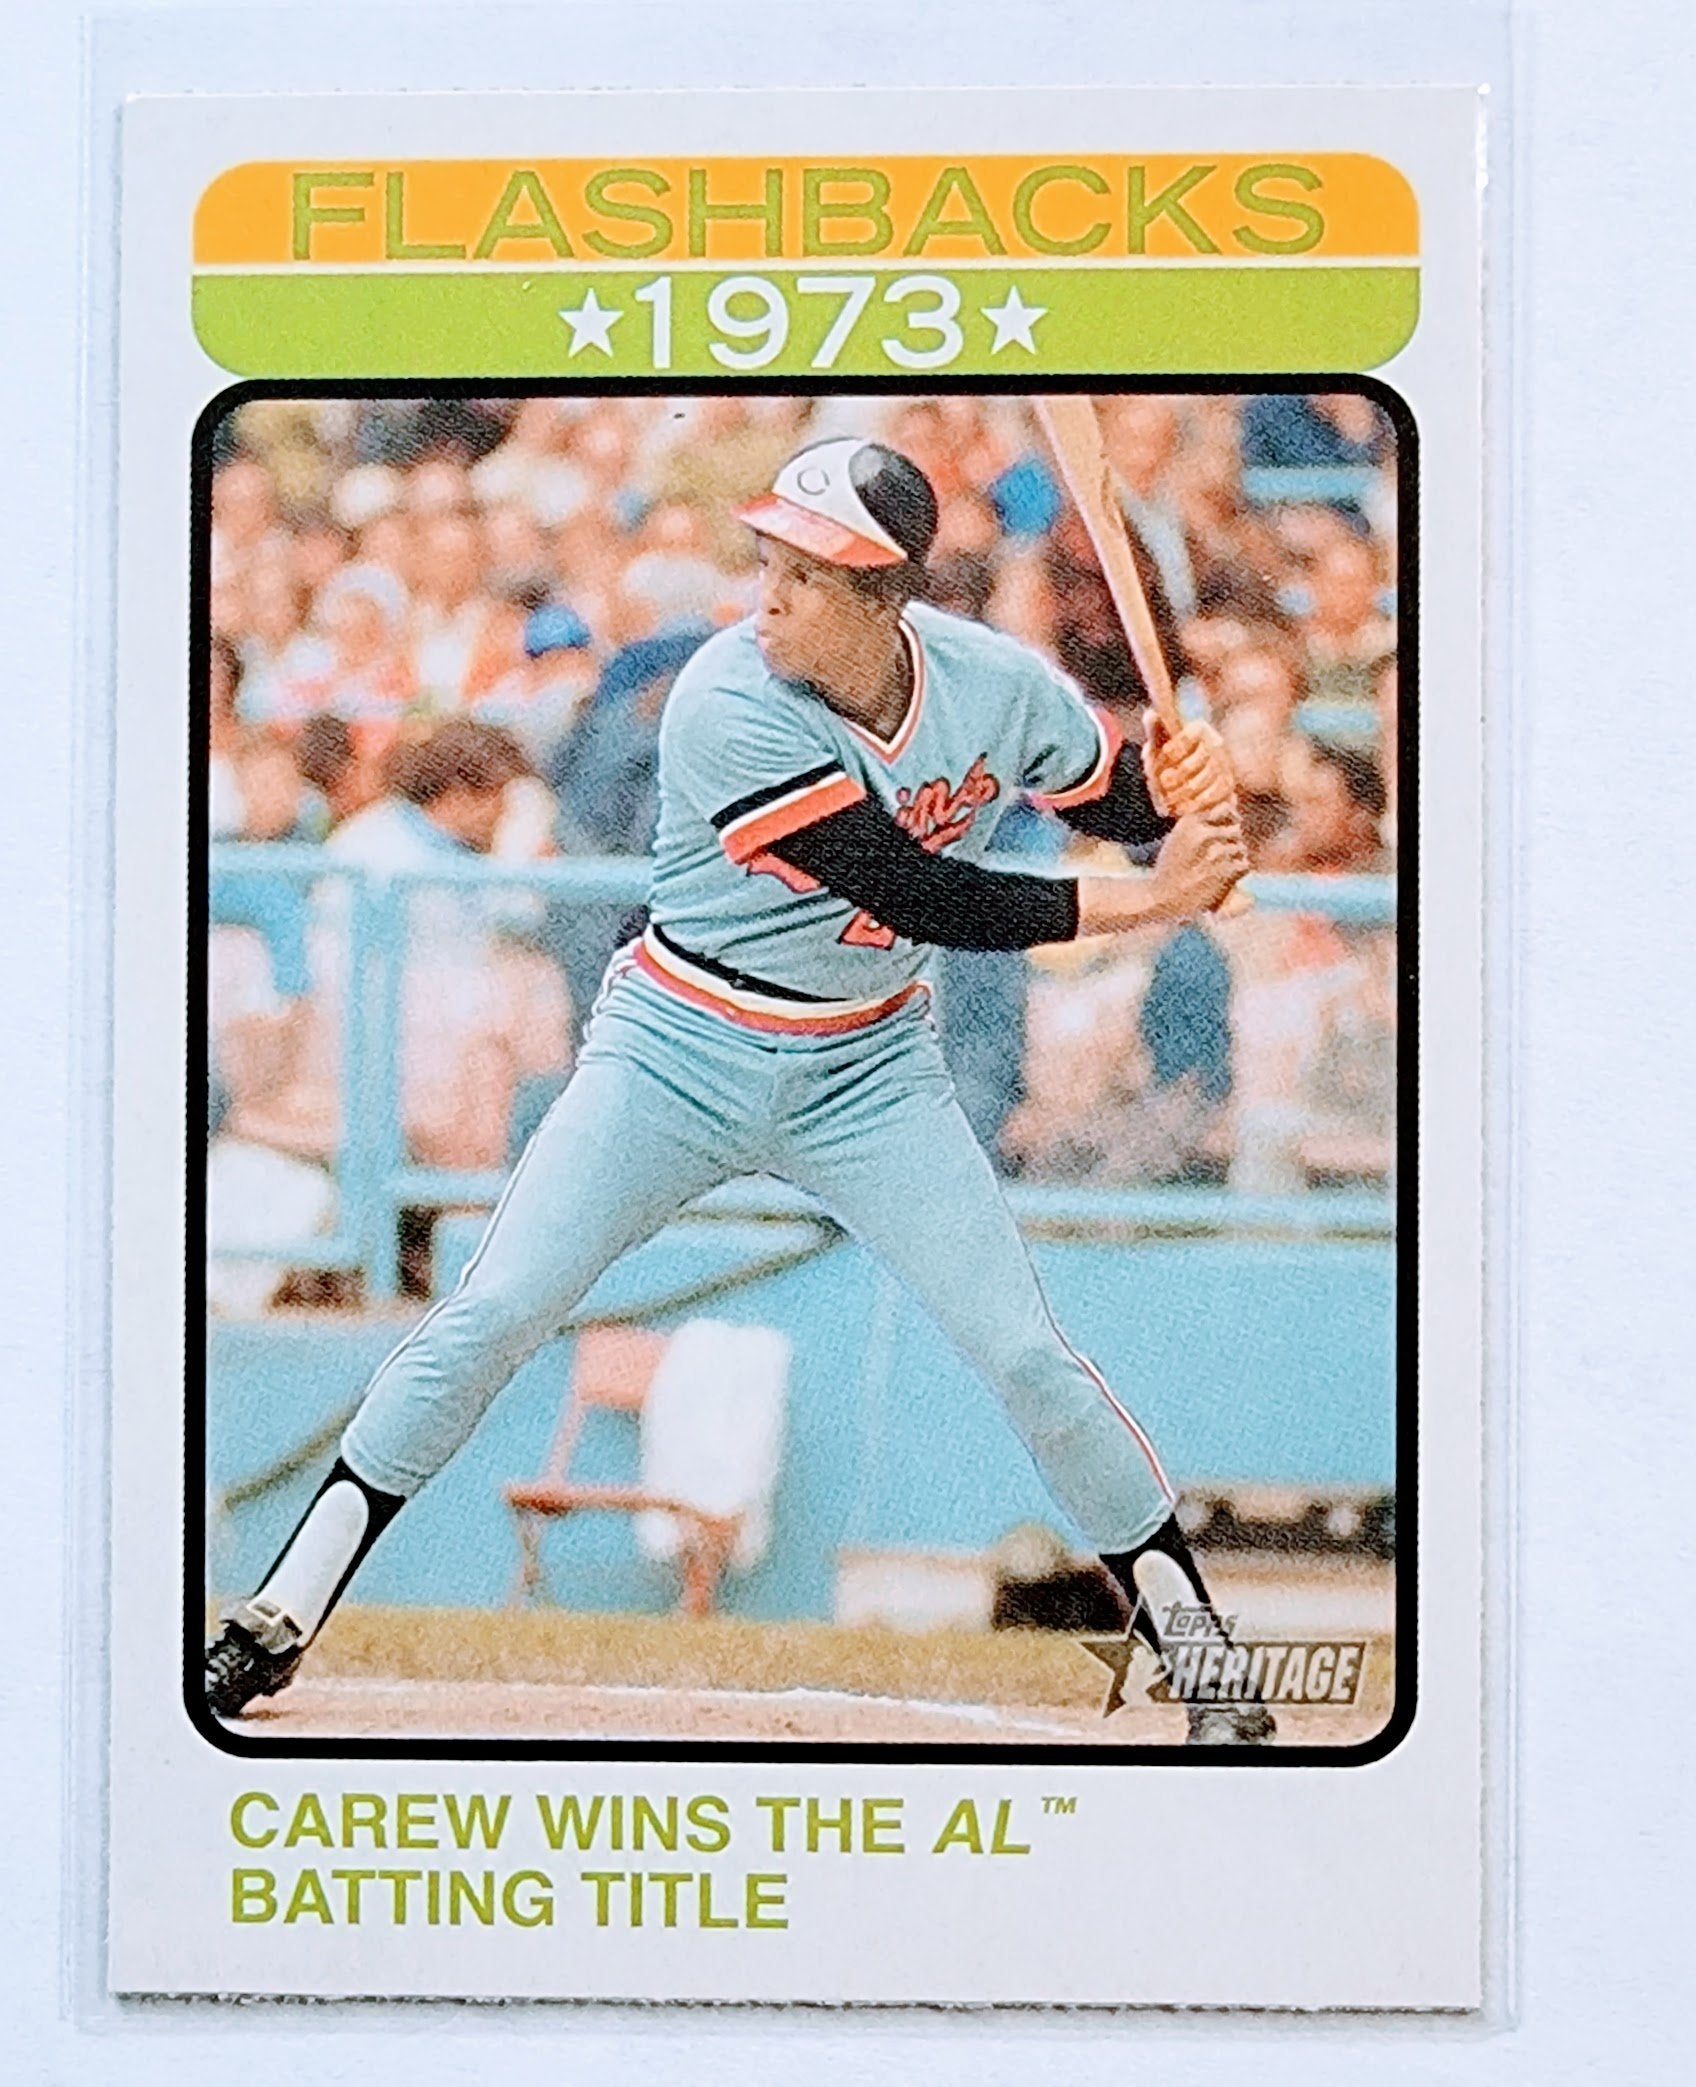 2022 Topps Heritage Rod Carew 1973 Flashbacks Insert Baseball Card AVM1 simple Xclusive Collectibles   